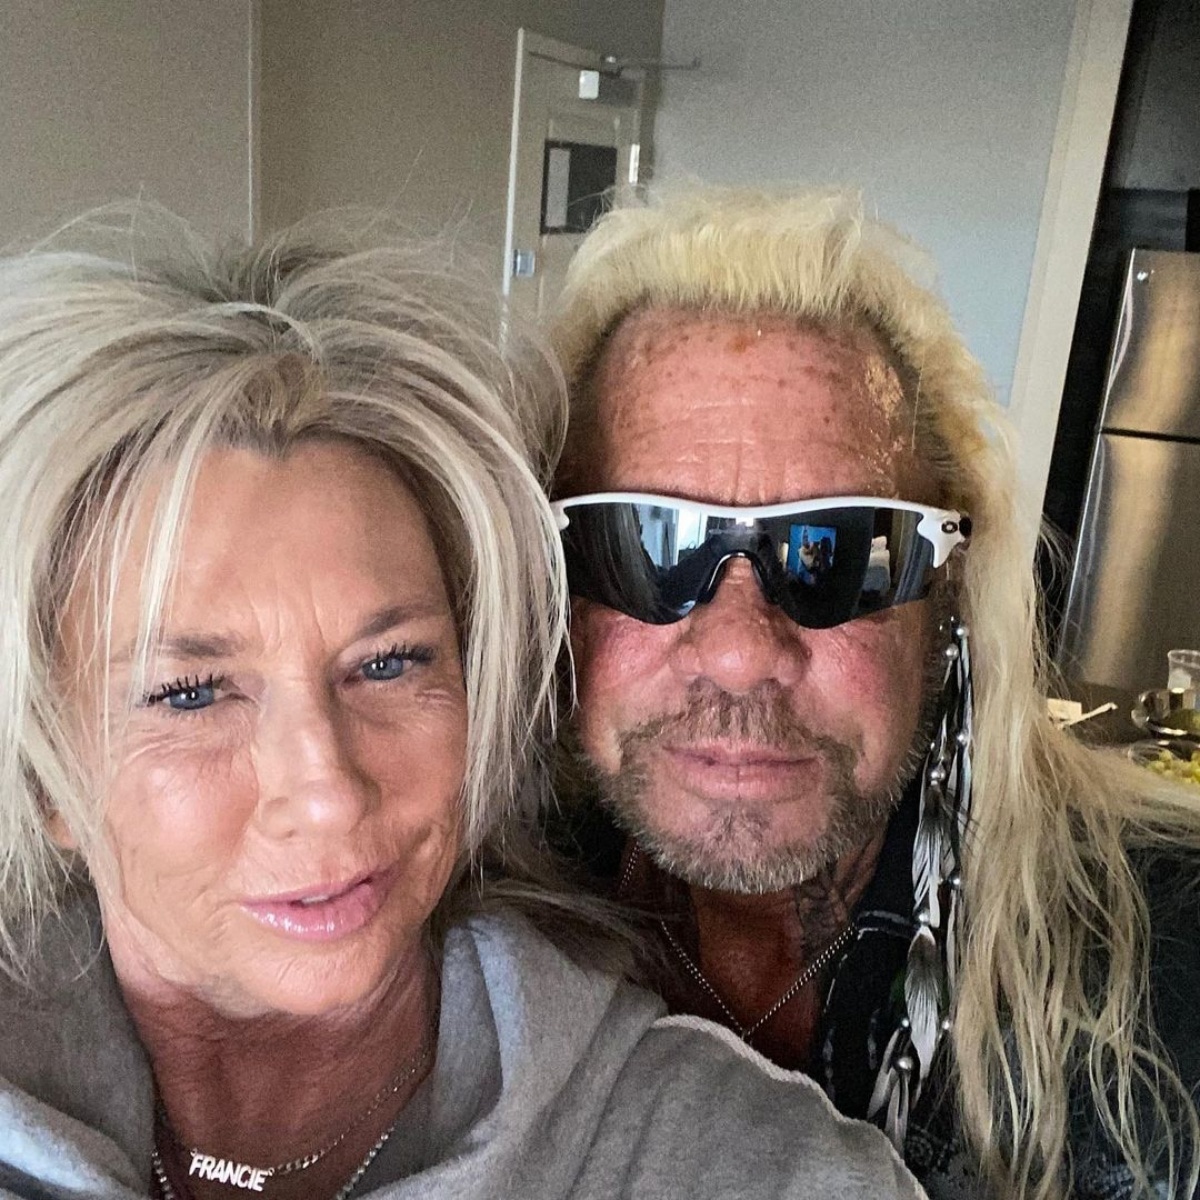 Relive Dog The Bounty Hunter And Francie Frane'S Controversial Romance - E!  Online